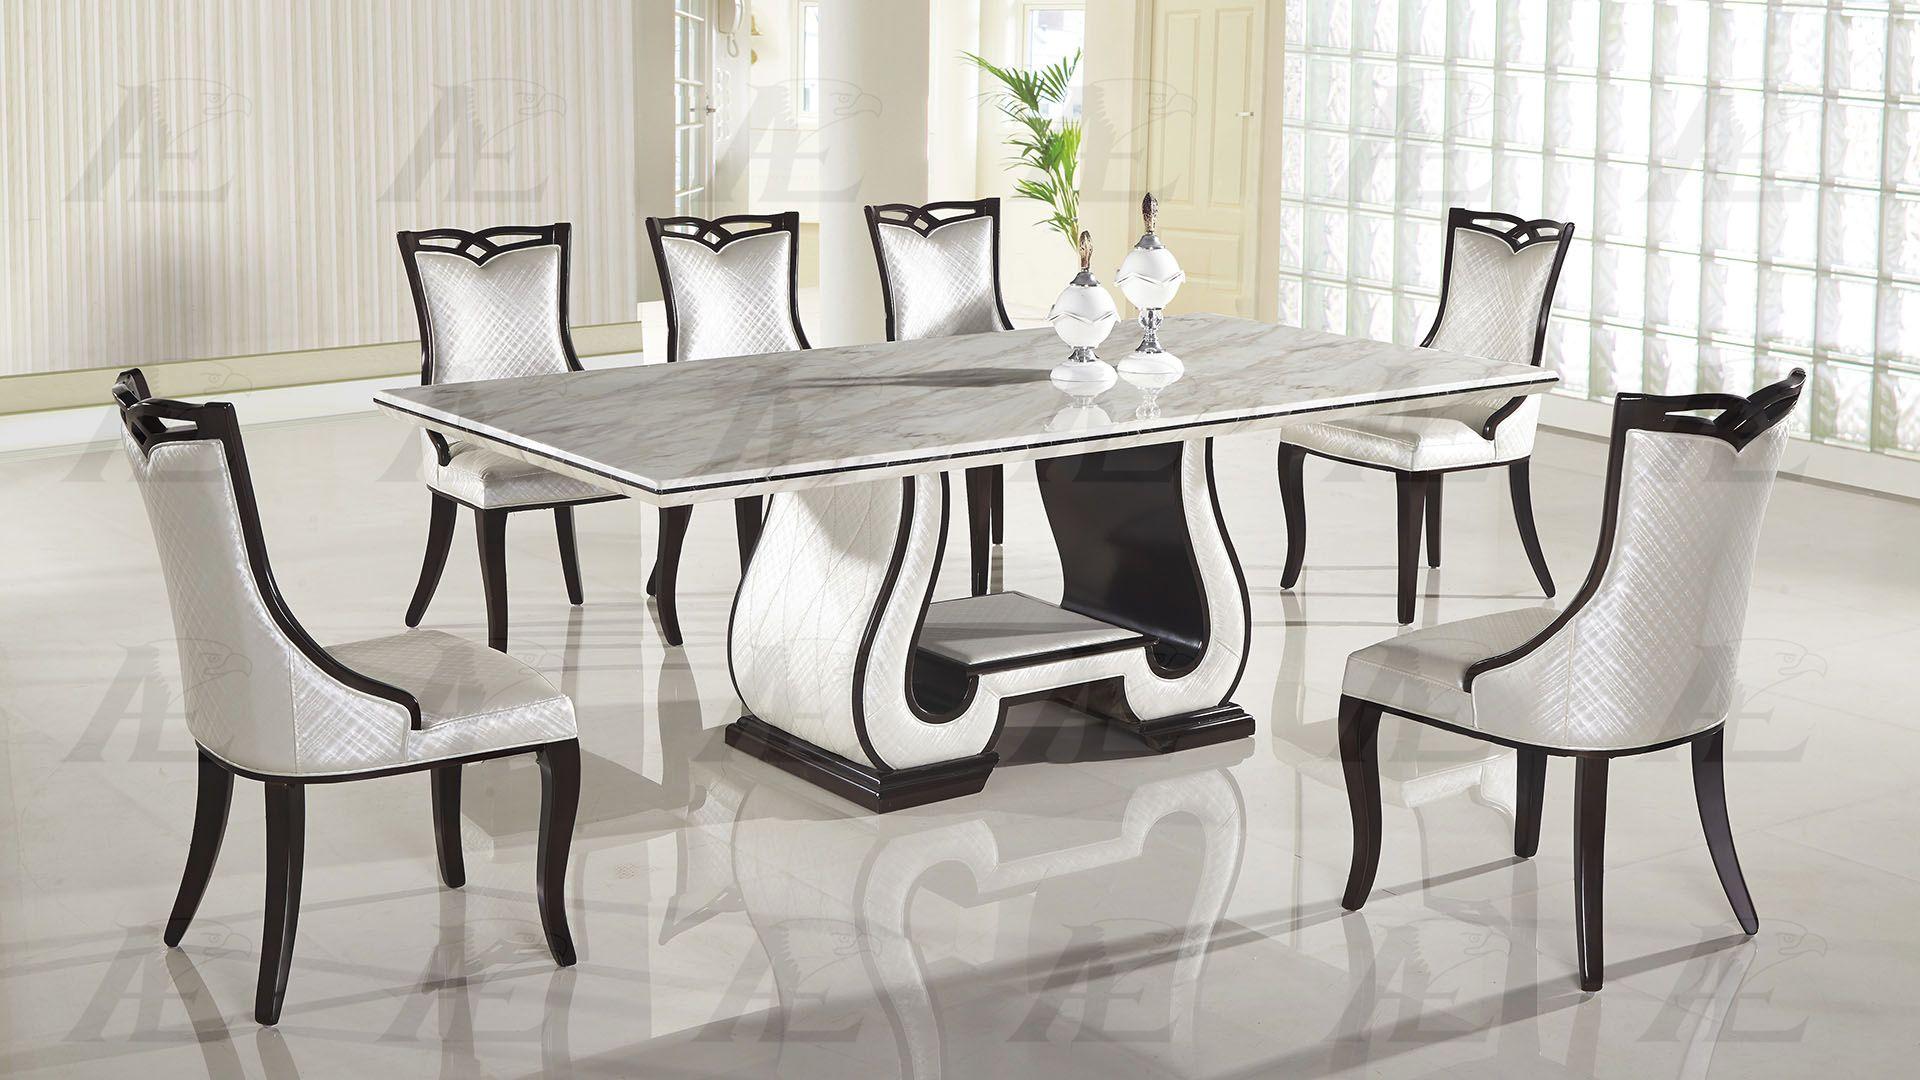 

                    
American Eagle Furniture DT-H901 / CK-H1212 Dining Table Set White/Black PU Purchase 
